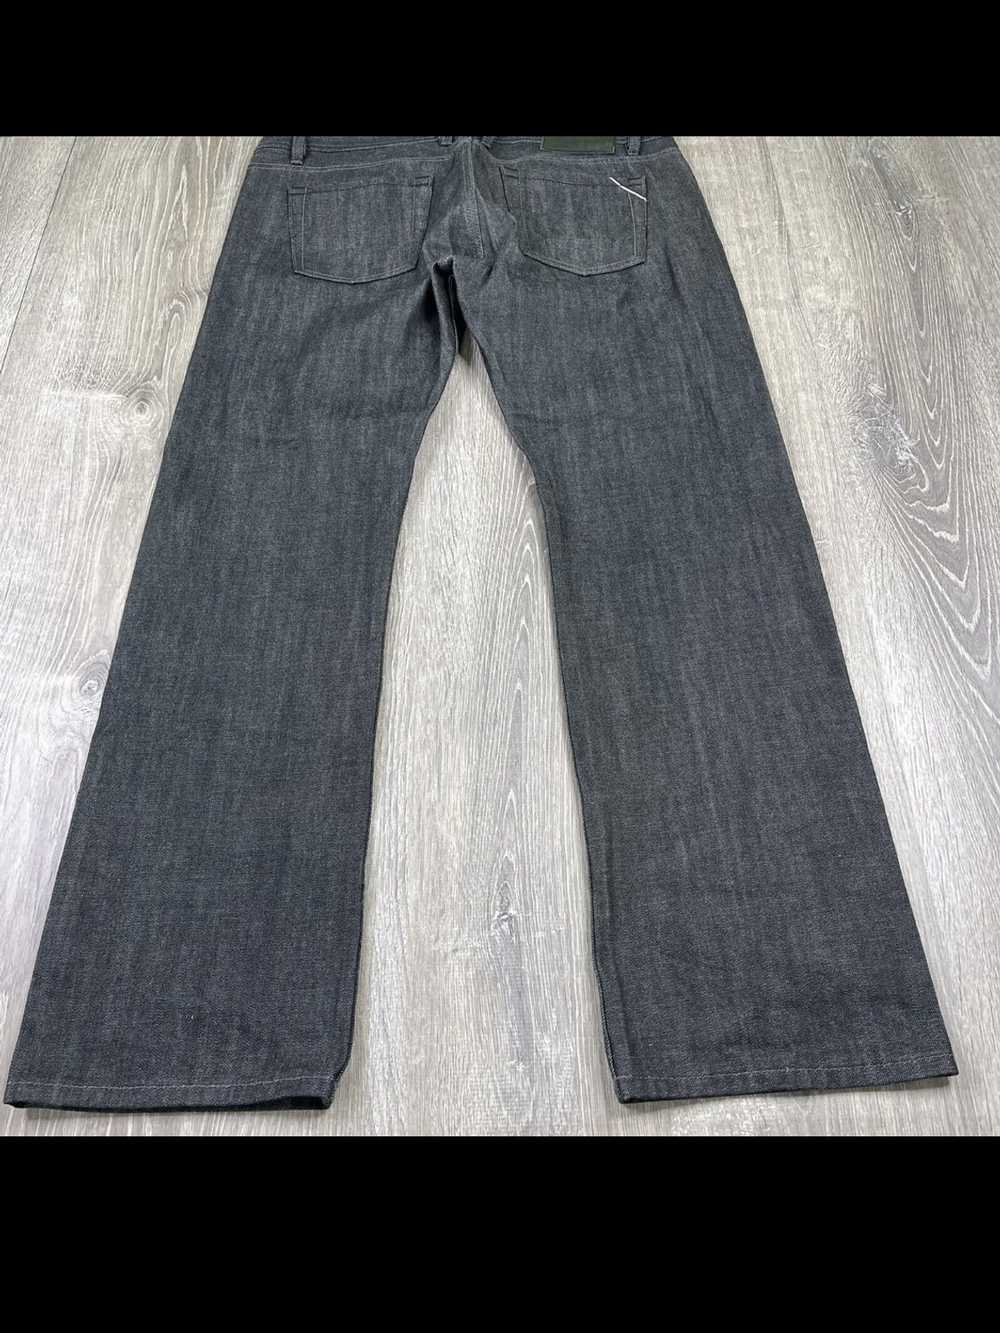 Cult Of Individuality Japanese Salvage Denim Jeans - image 3